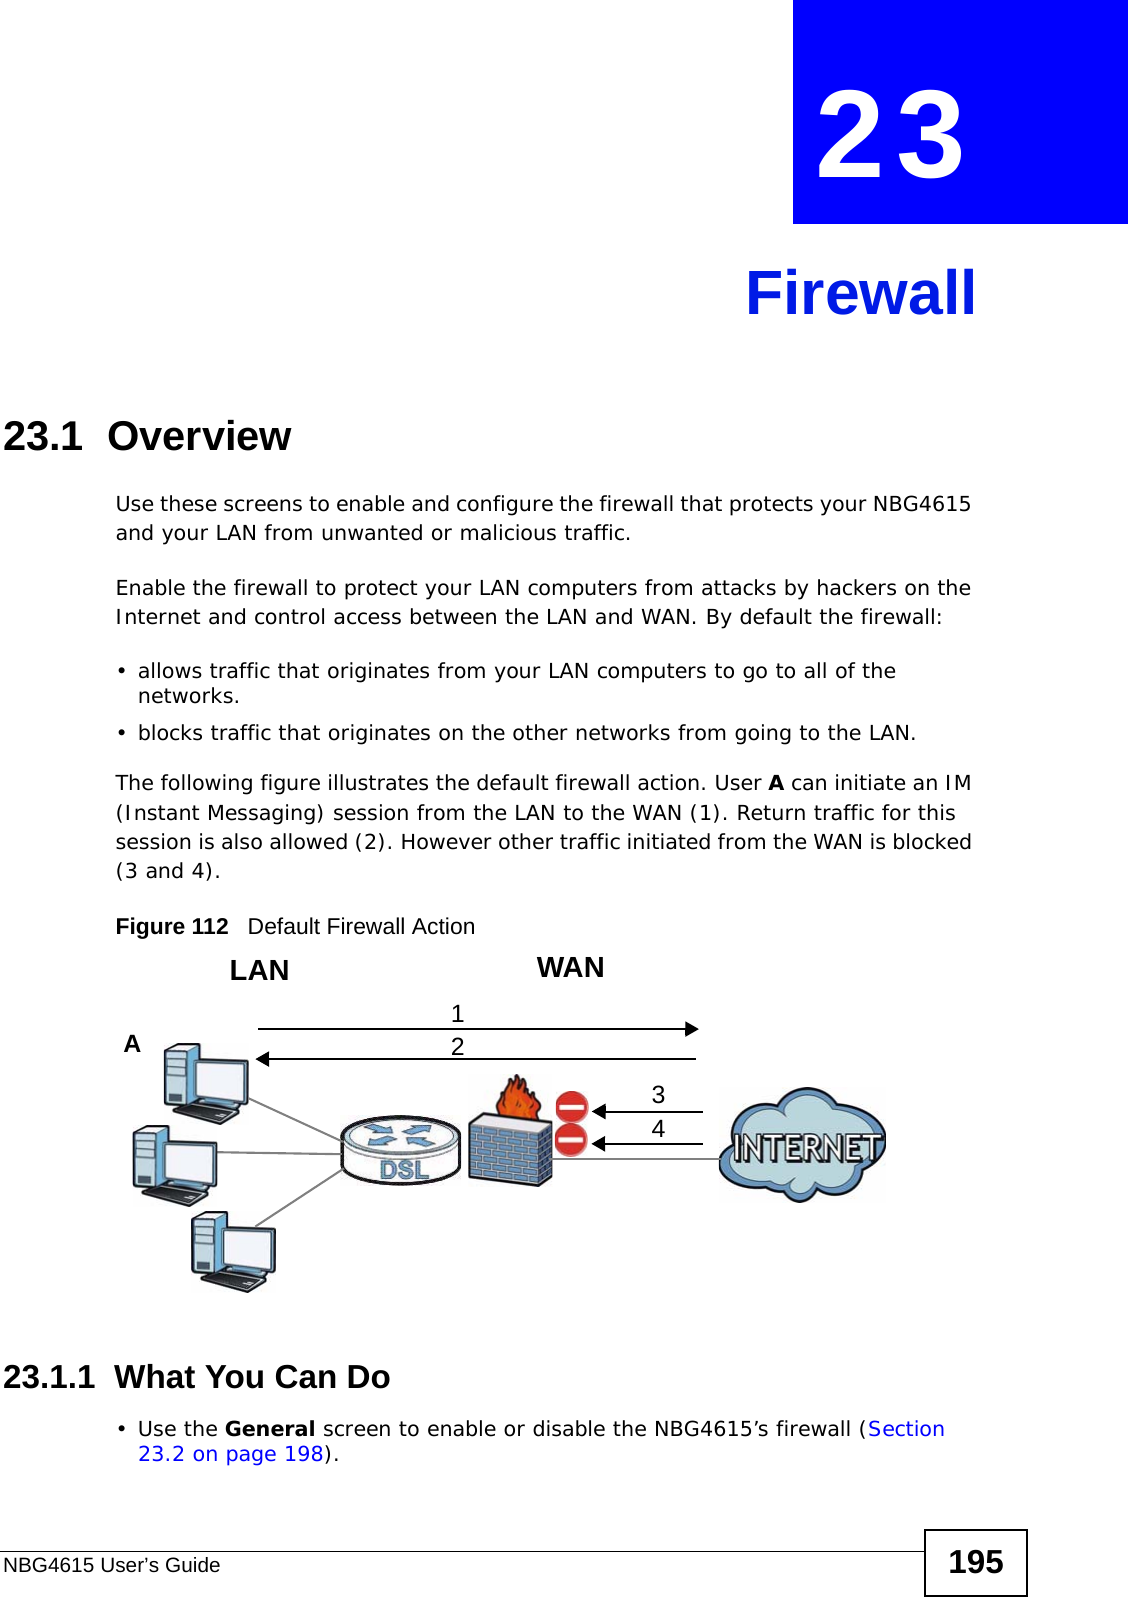 NBG4615 User’s Guide 195CHAPTER  23  Firewall23.1  Overview   Use these screens to enable and configure the firewall that protects your NBG4615 and your LAN from unwanted or malicious traffic.Enable the firewall to protect your LAN computers from attacks by hackers on the Internet and control access between the LAN and WAN. By default the firewall:• allows traffic that originates from your LAN computers to go to all of the networks. • blocks traffic that originates on the other networks from going to the LAN. The following figure illustrates the default firewall action. User A can initiate an IM (Instant Messaging) session from the LAN to the WAN (1). Return traffic for this session is also allowed (2). However other traffic initiated from the WAN is blocked (3 and 4).Figure 112   Default Firewall Action23.1.1  What You Can Do•Use the General screen to enable or disable the NBG4615’s firewall (Section 23.2 on page 198).WANLAN3412A